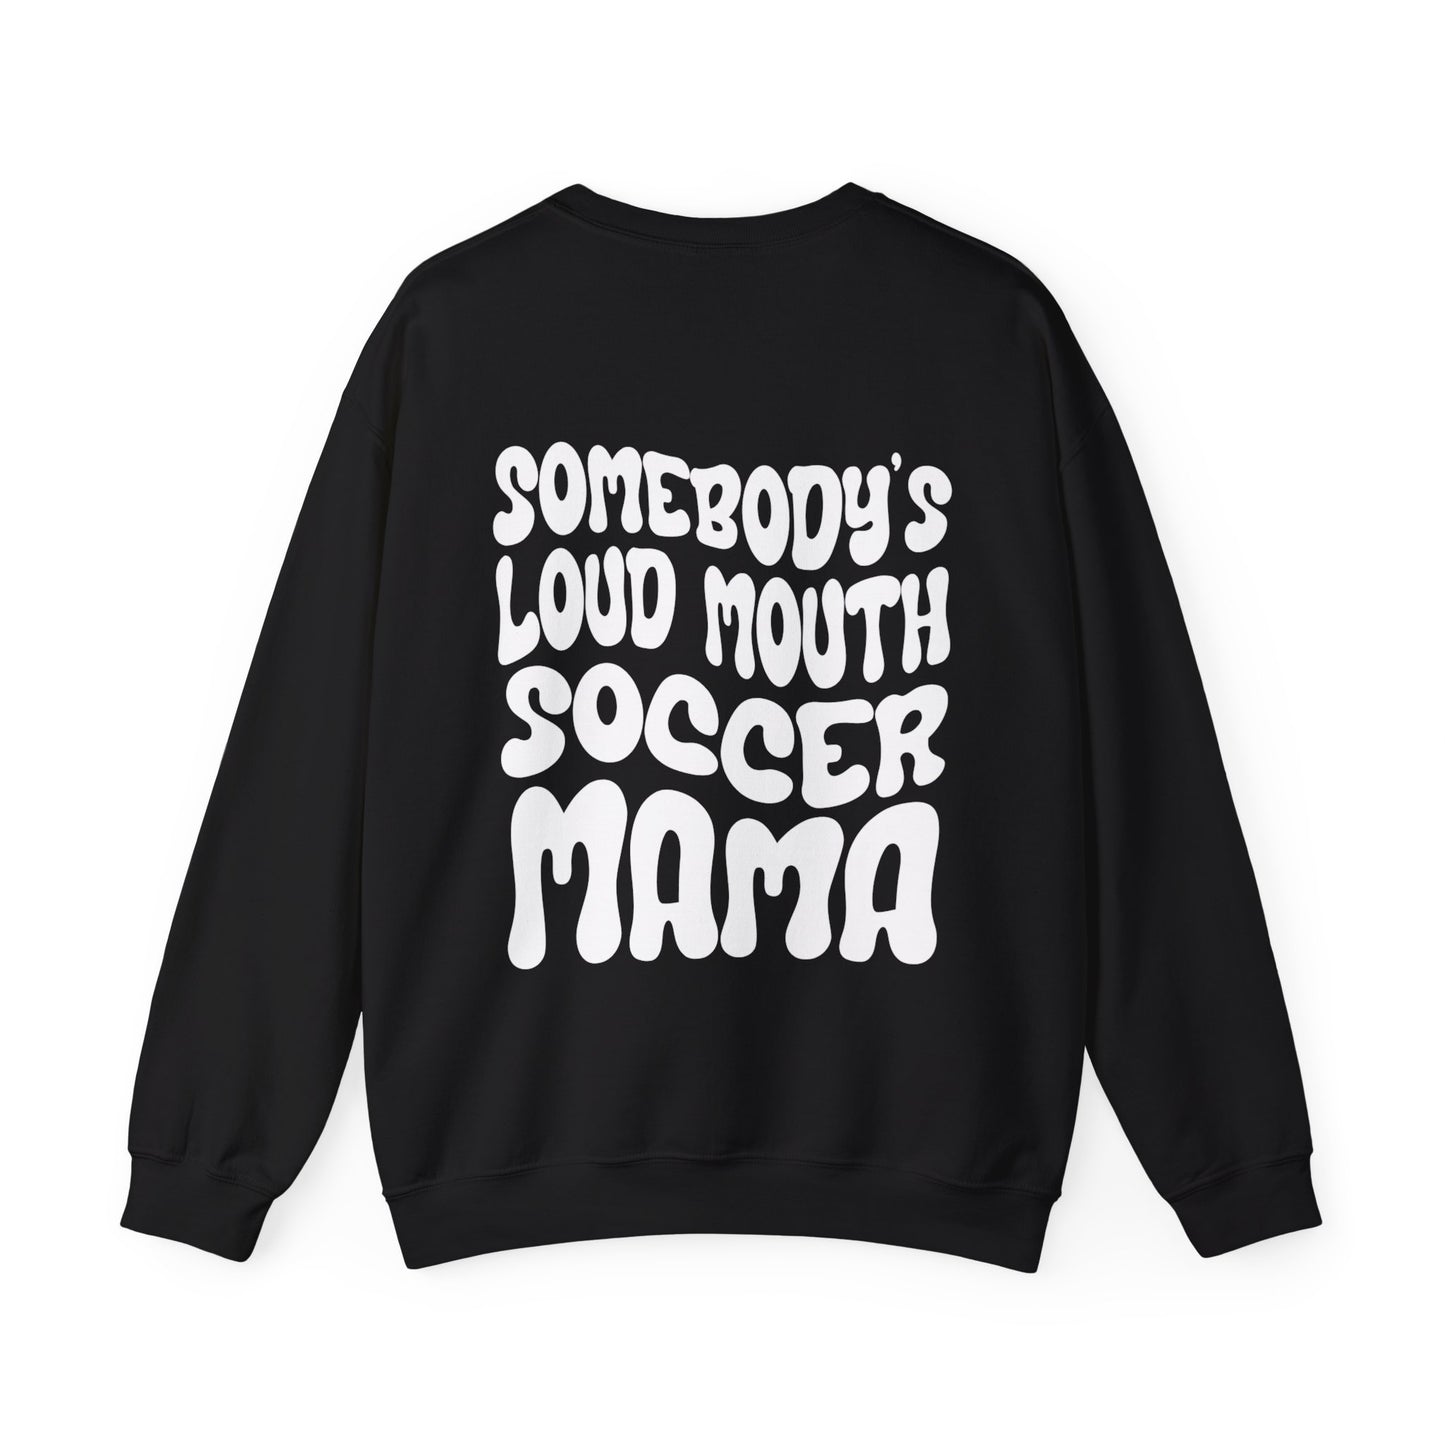 Loud Mouth Soccer Mama Sweatshirt (white letters)